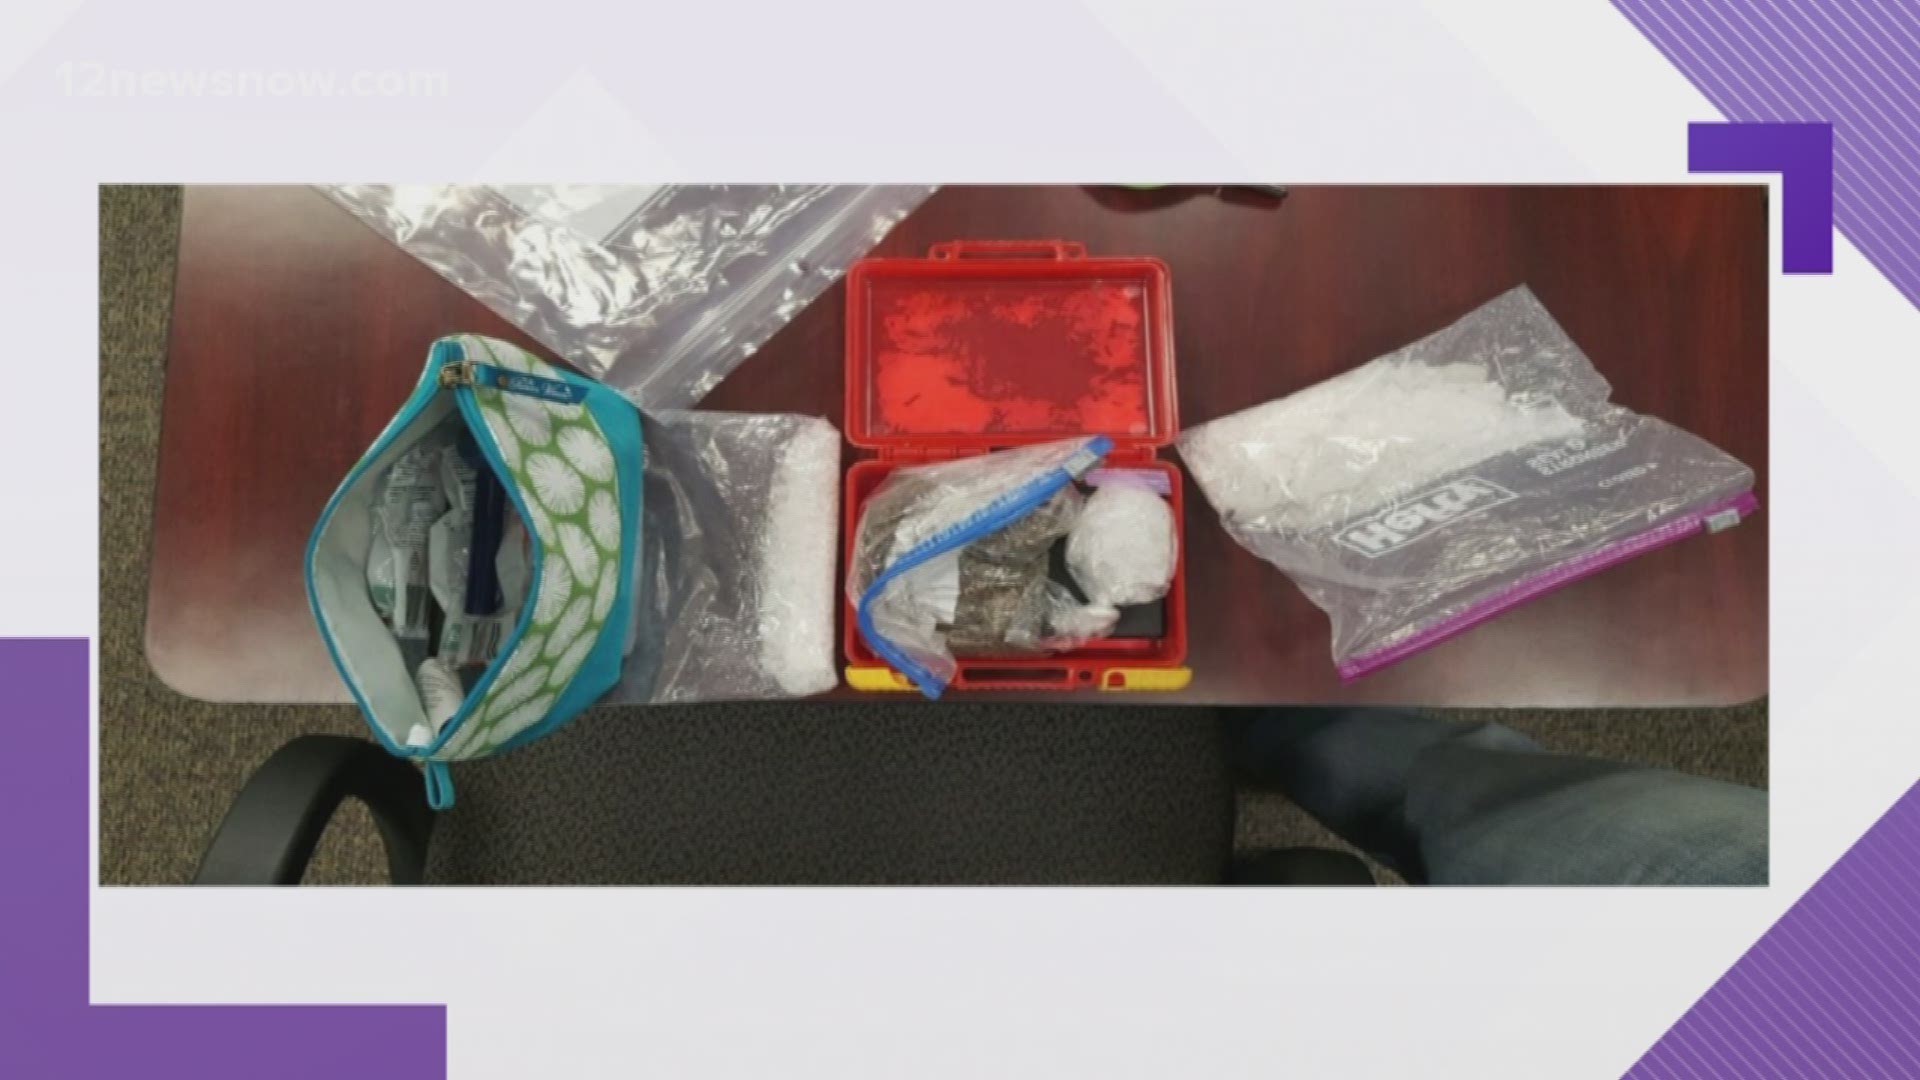 Approximately 7.25 ounces of methamphetamine, 1.5 grams of powder cocaine and 4.25 ounces of marijuana were found in their possession after a traffic stop at College Street and Major Drive.